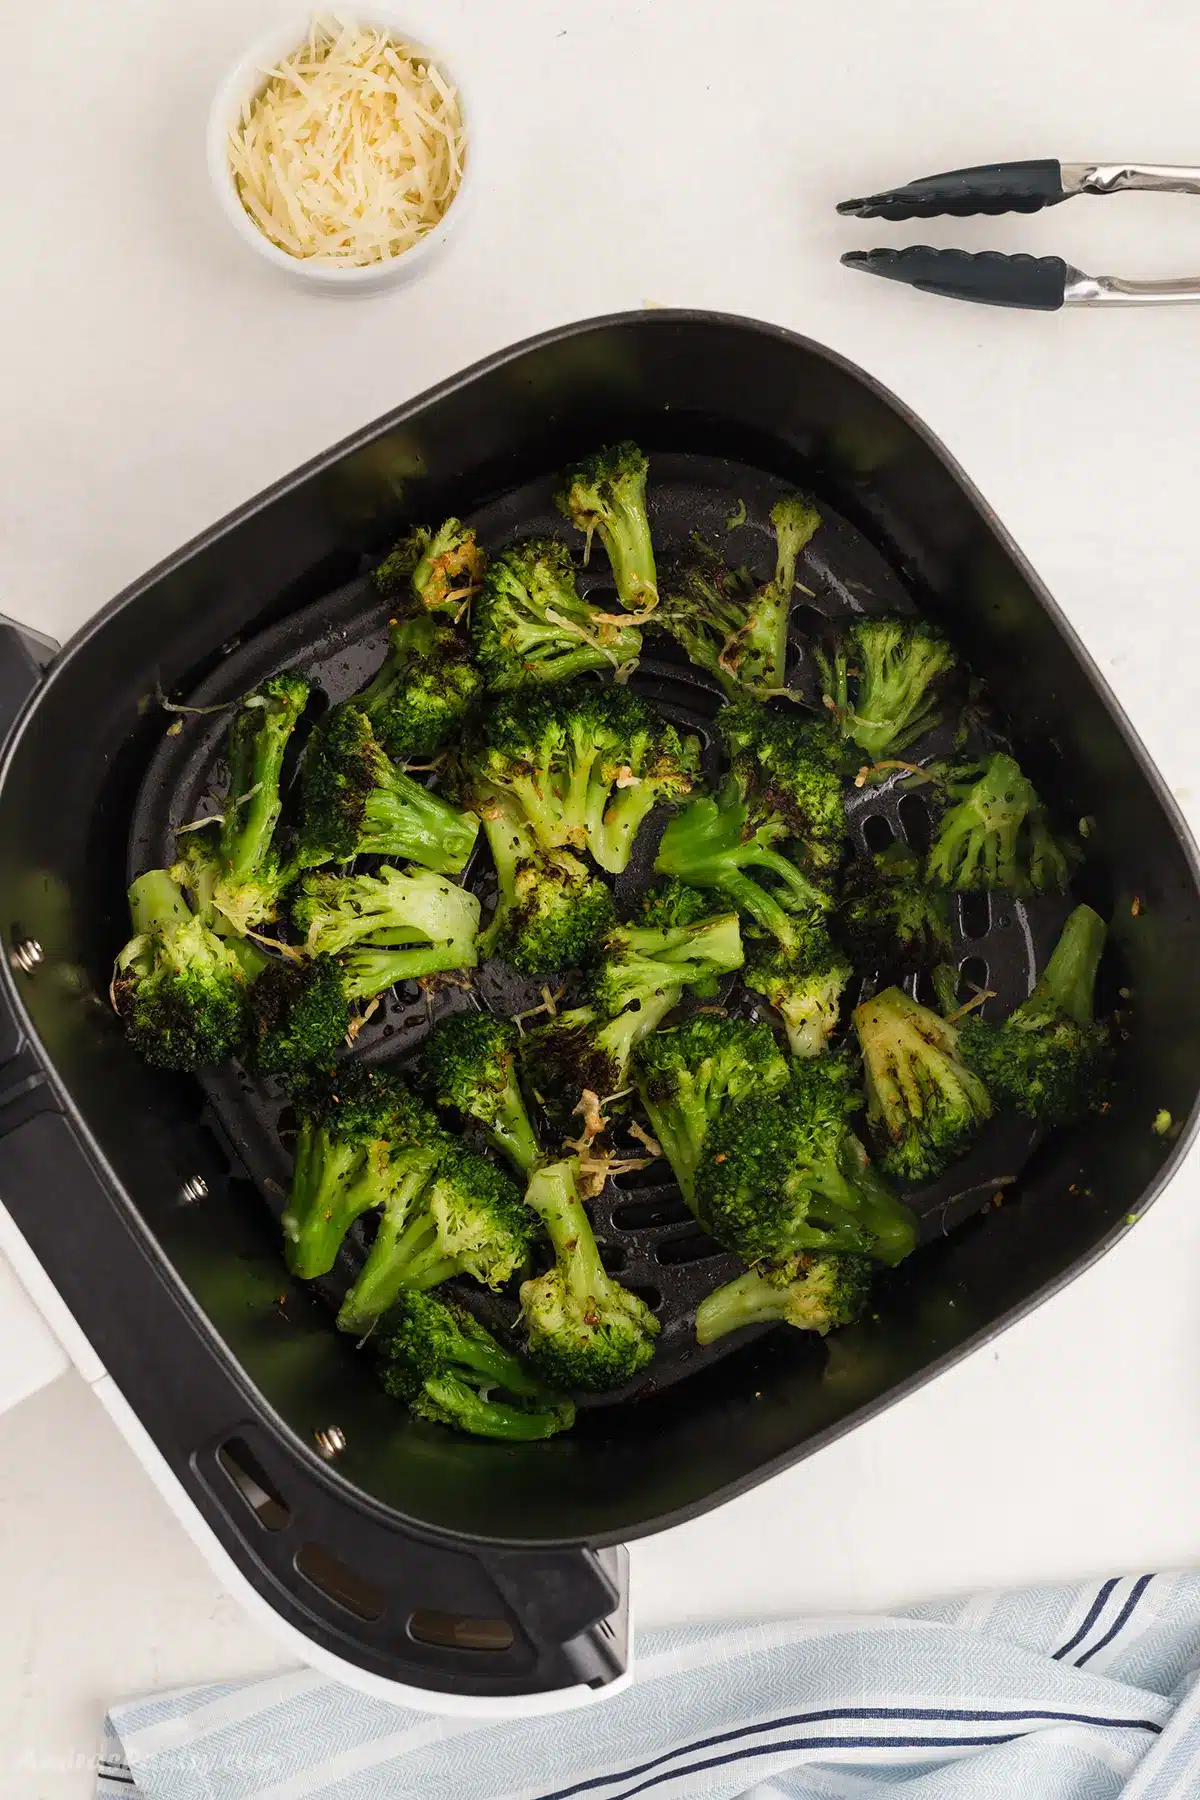 Broccoli in the air fryer basket.